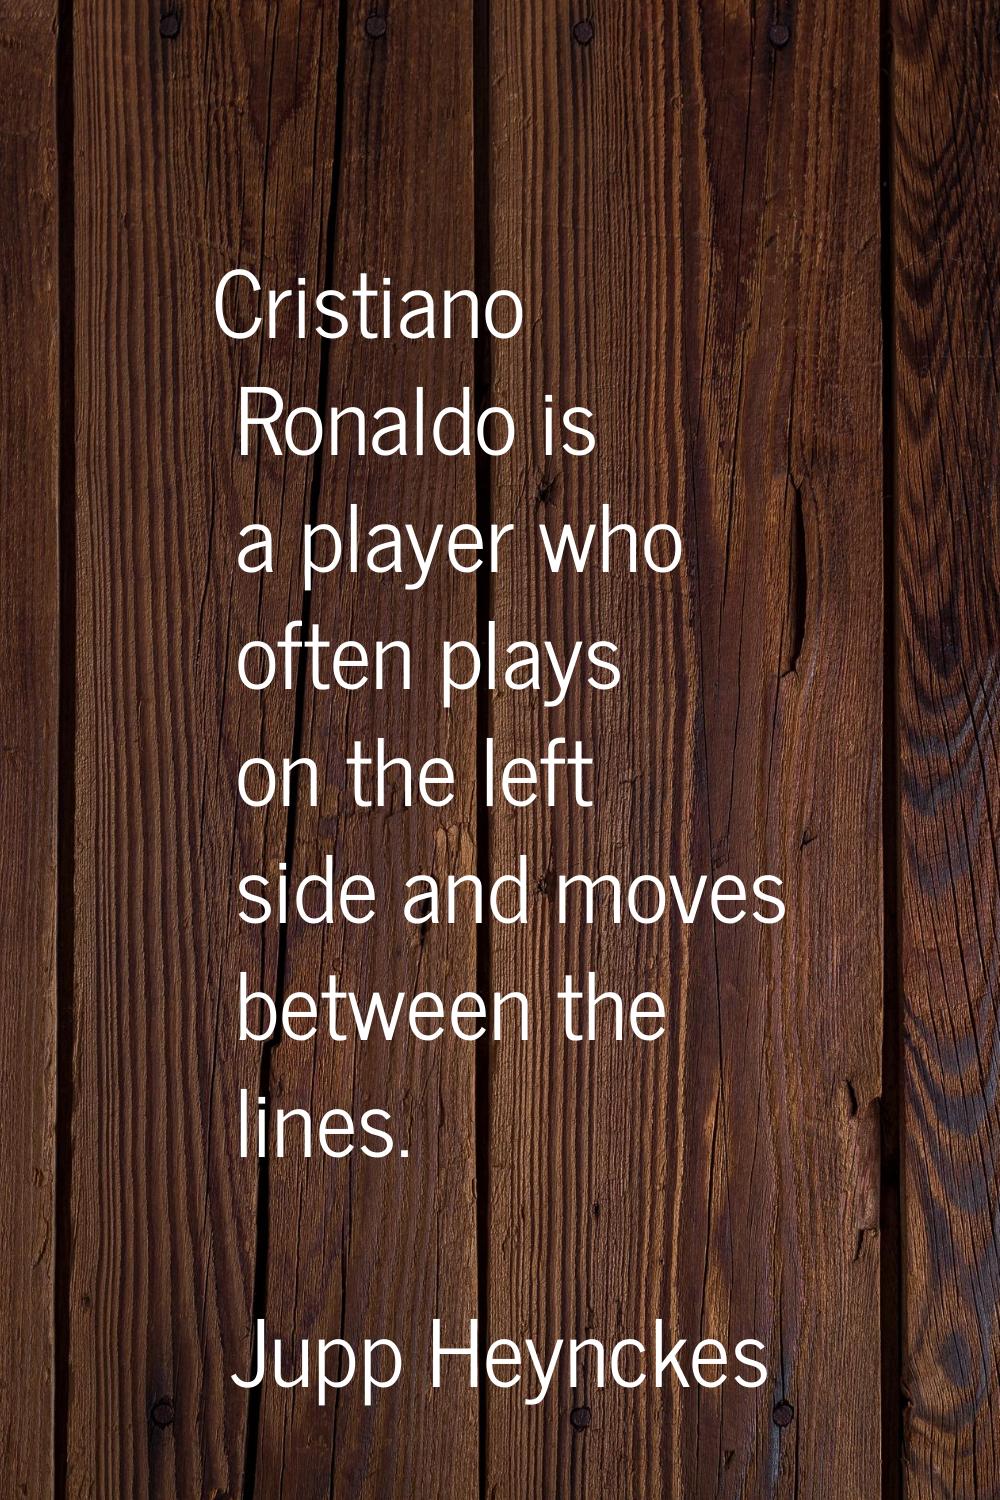 Cristiano Ronaldo is a player who often plays on the left side and moves between the lines.